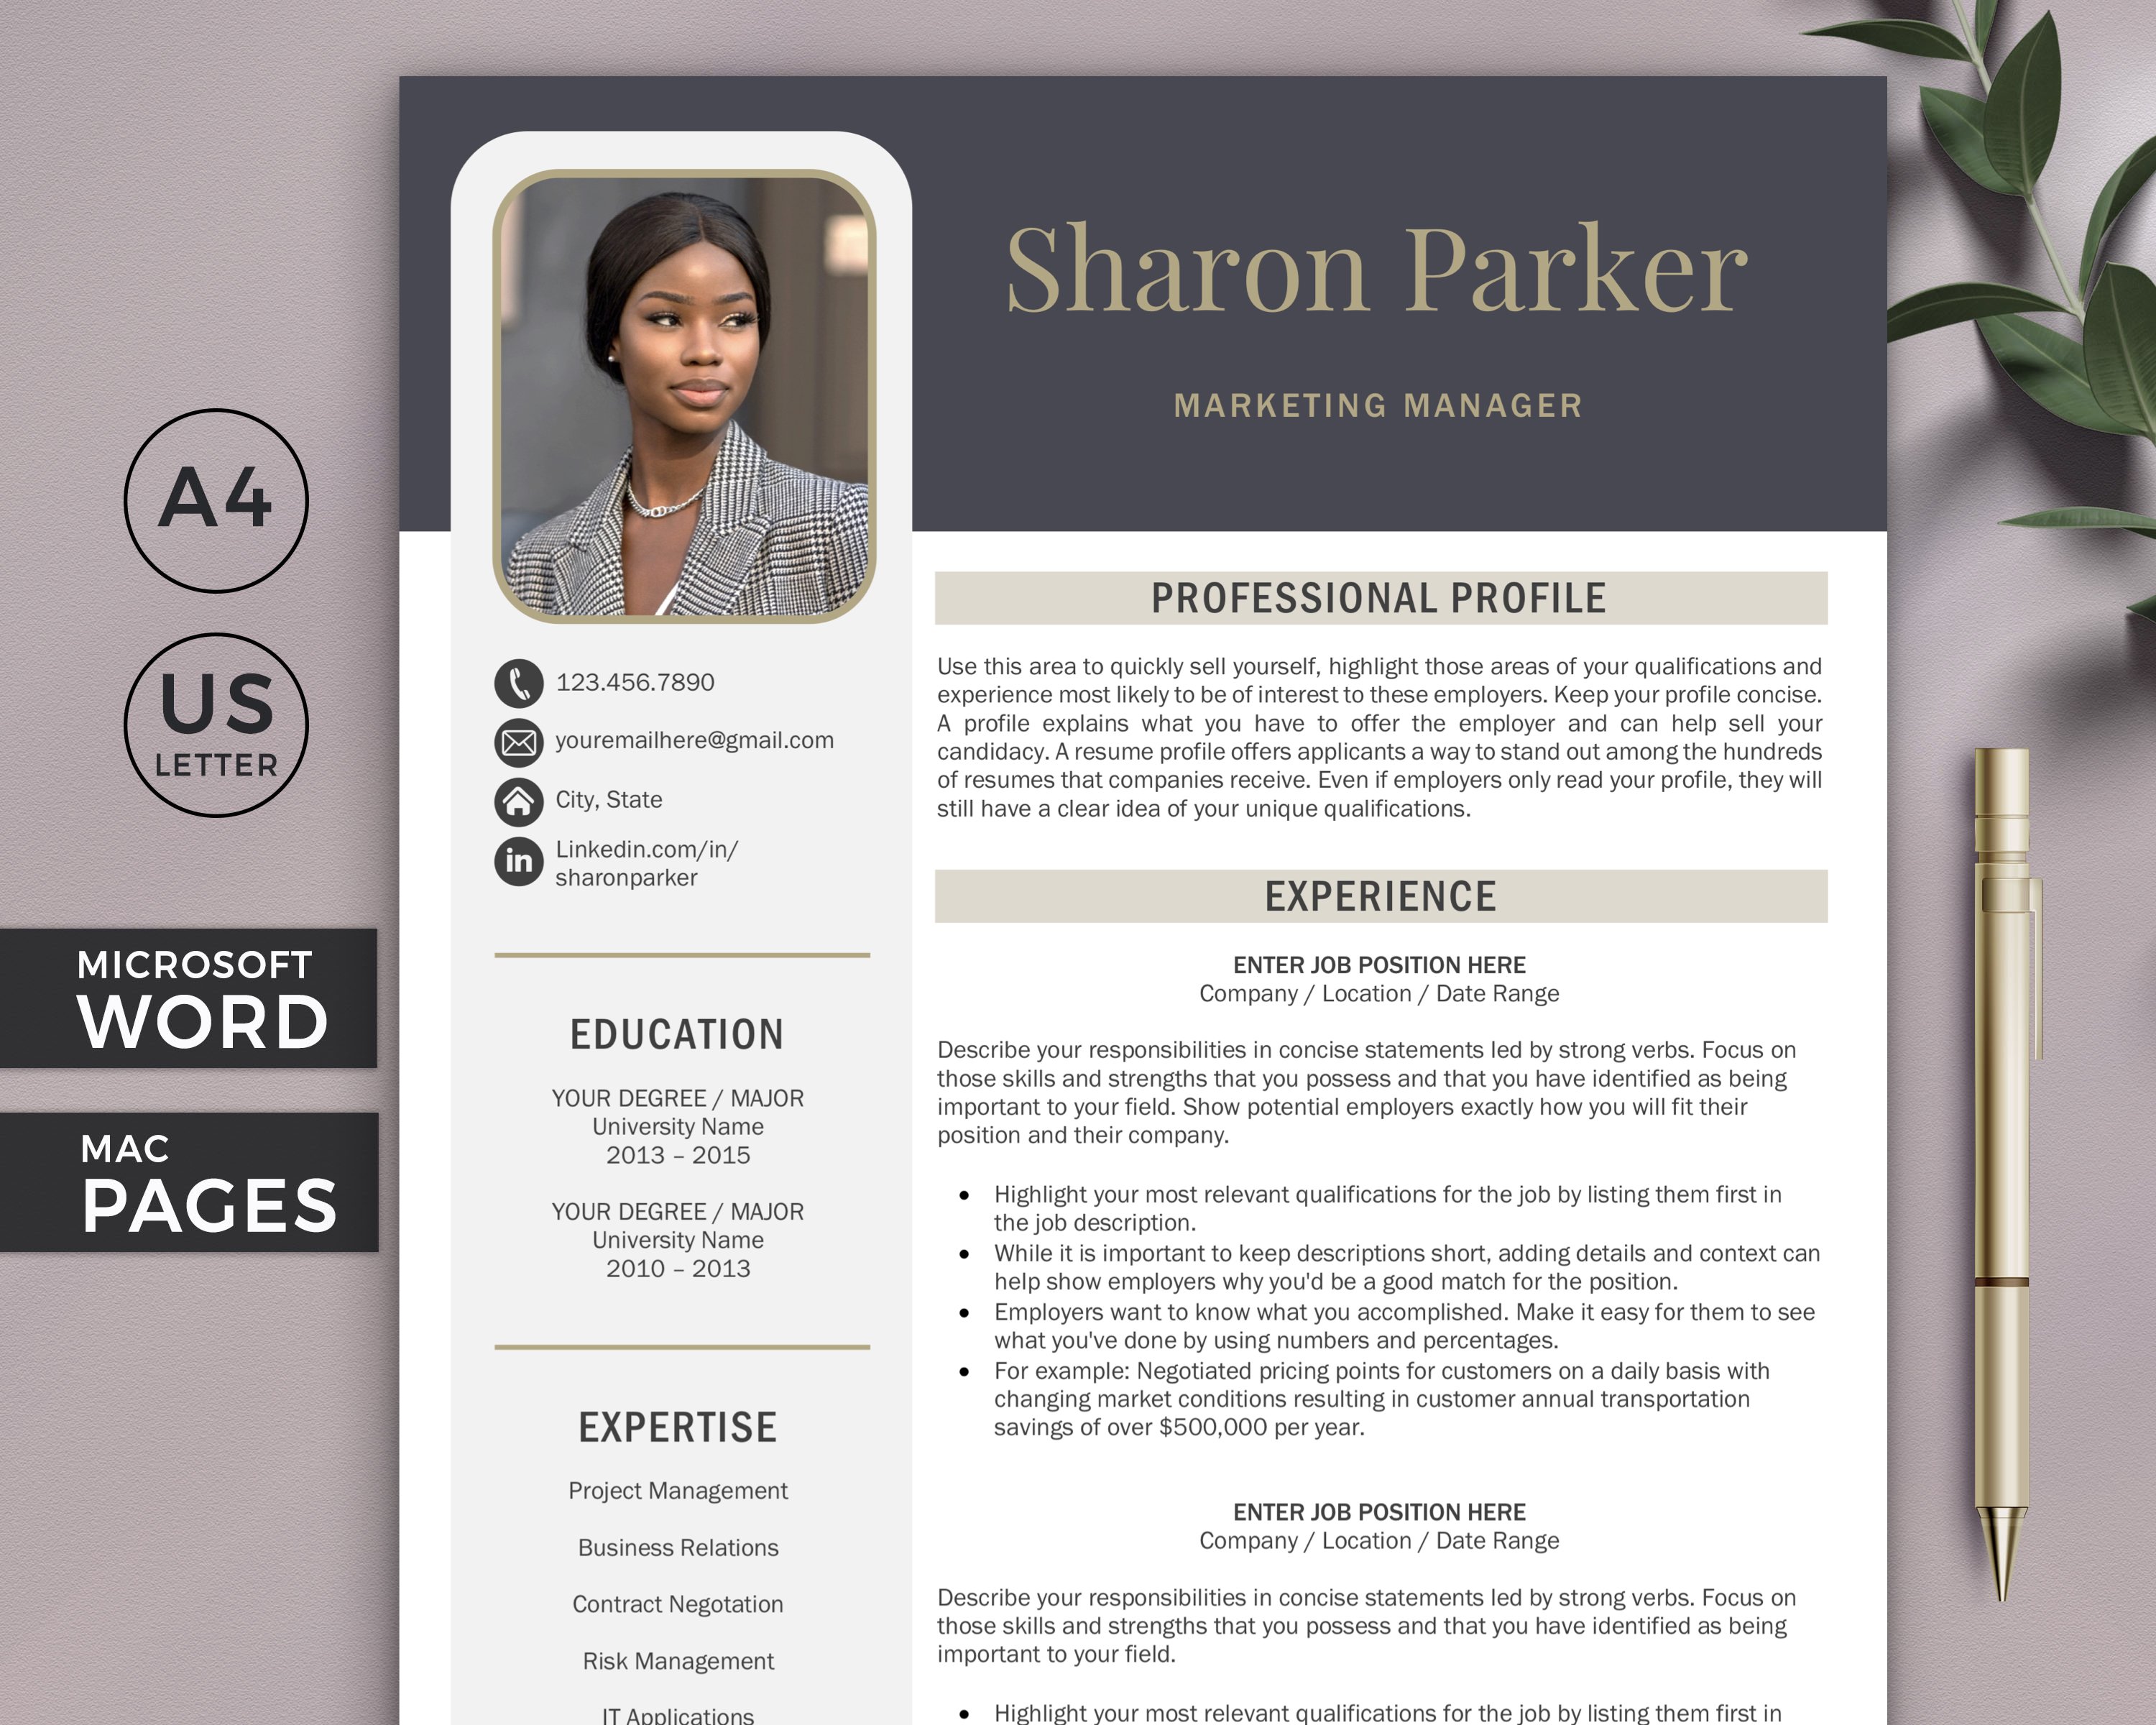 Resume Template + Cover Letter CV cover image.